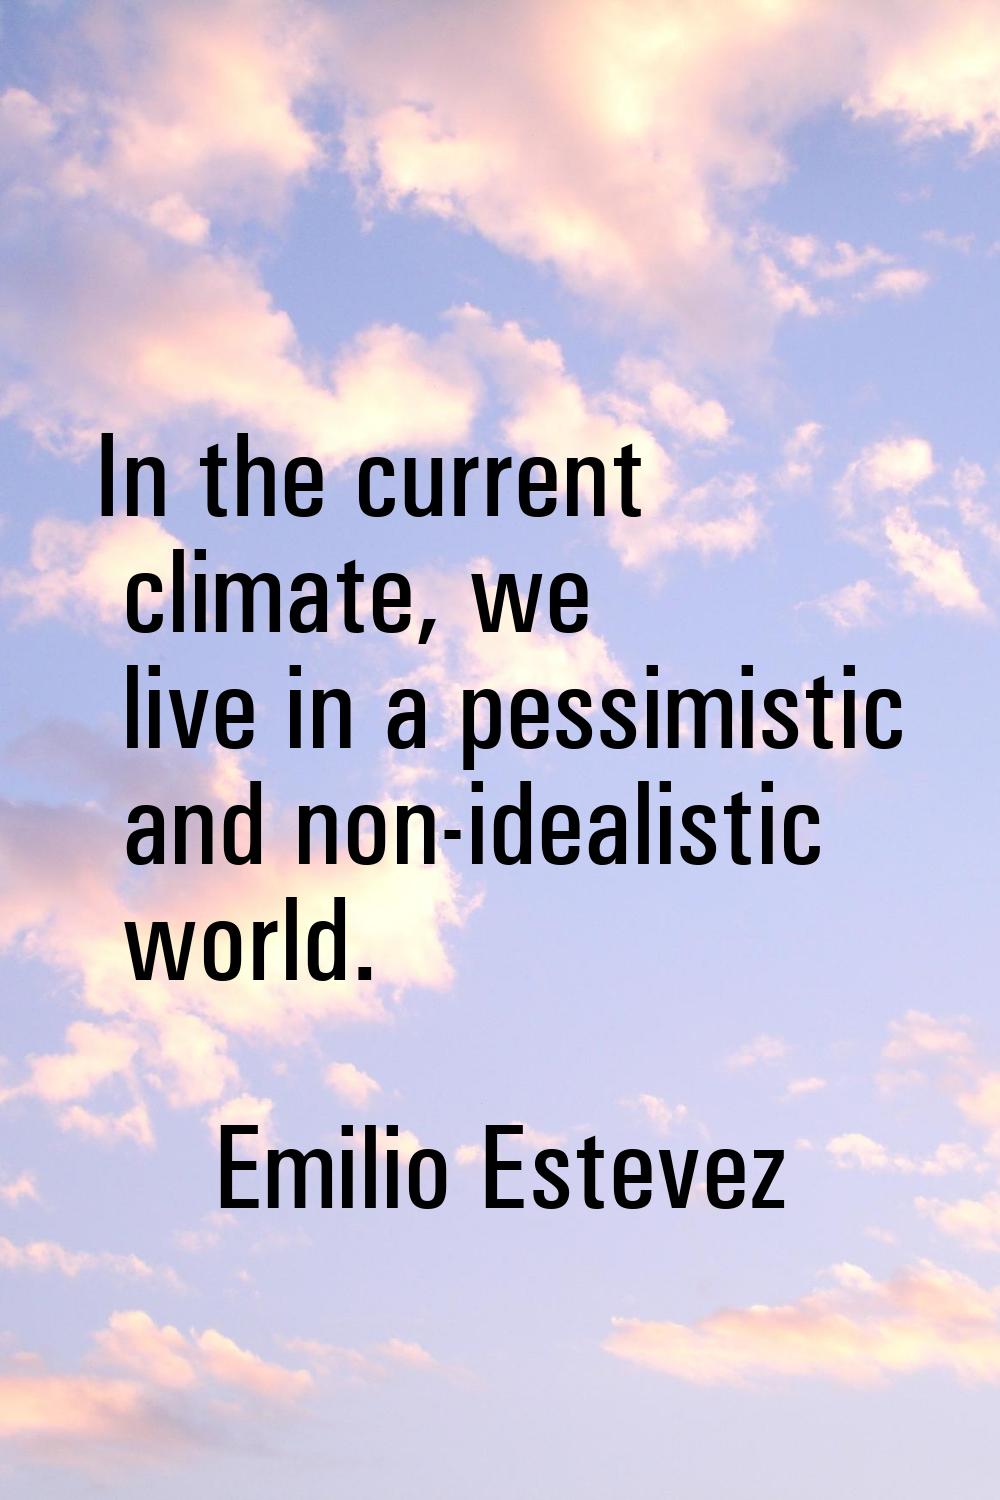 In the current climate, we live in a pessimistic and non-idealistic world.